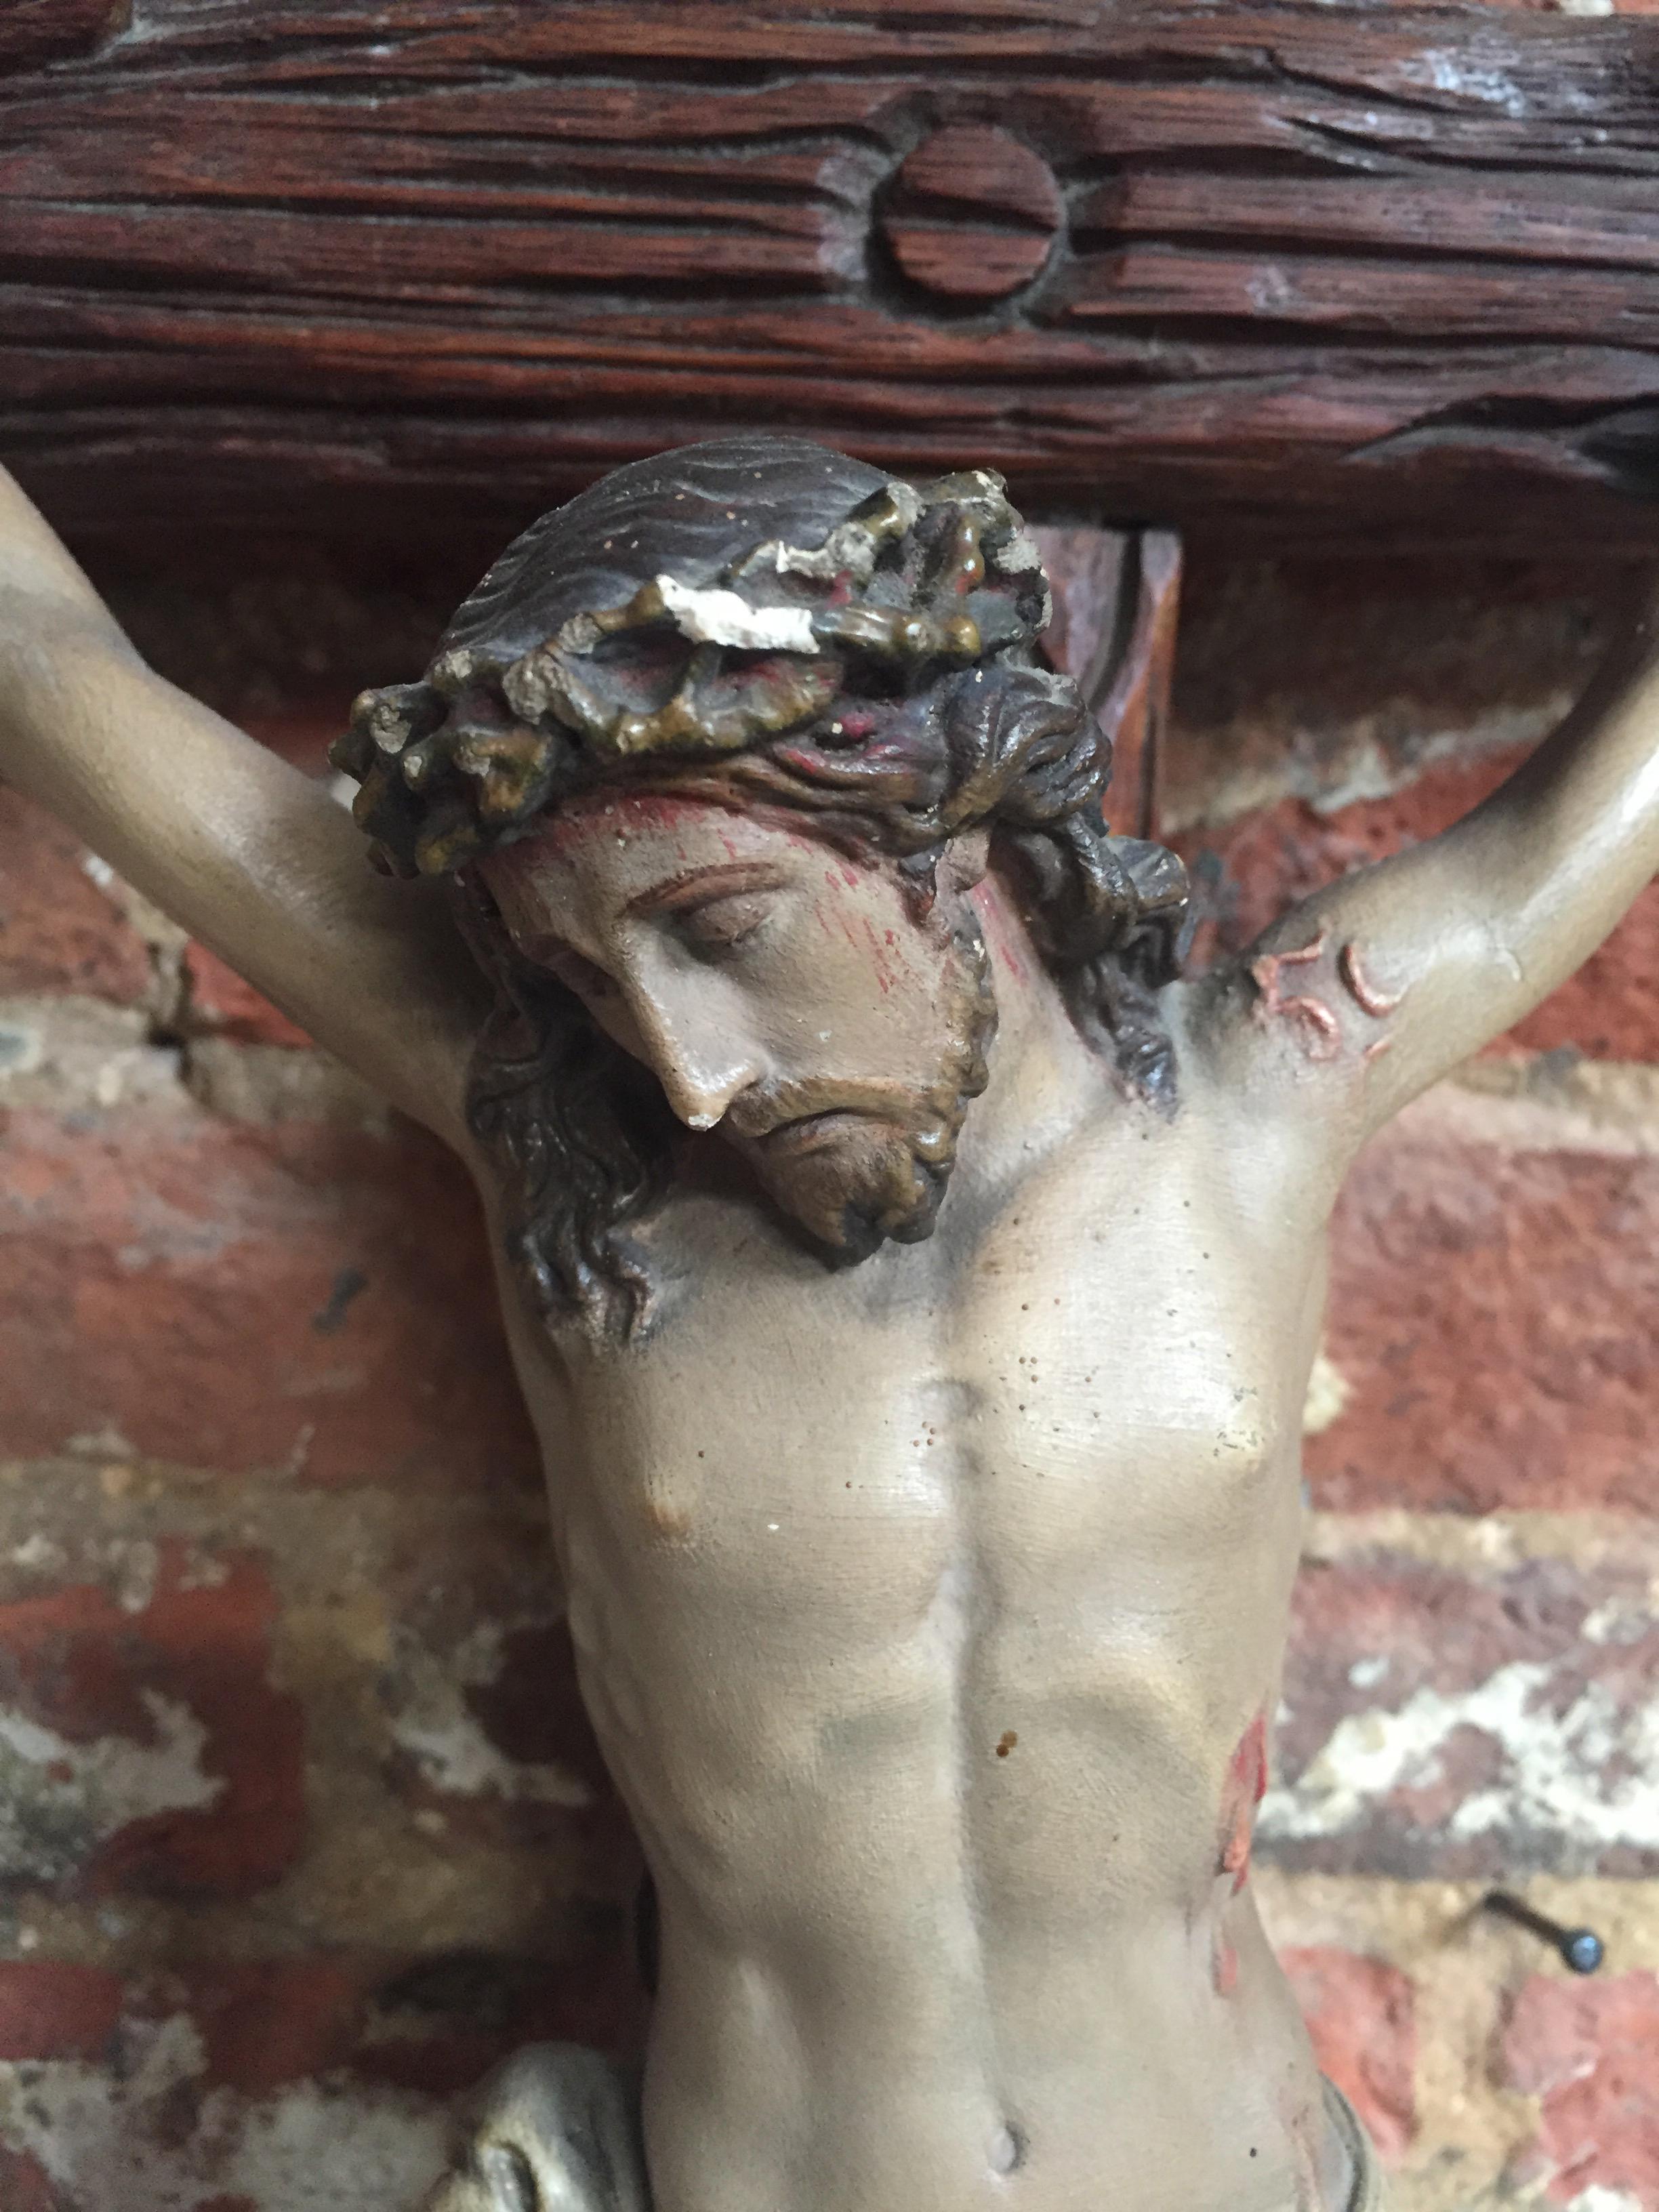 Late 19th century Belgian crucifix from De Dames Institute in Antwerp Belgium.
The cross is carved oakwood and Jesus is cast from plaster and hand painted.